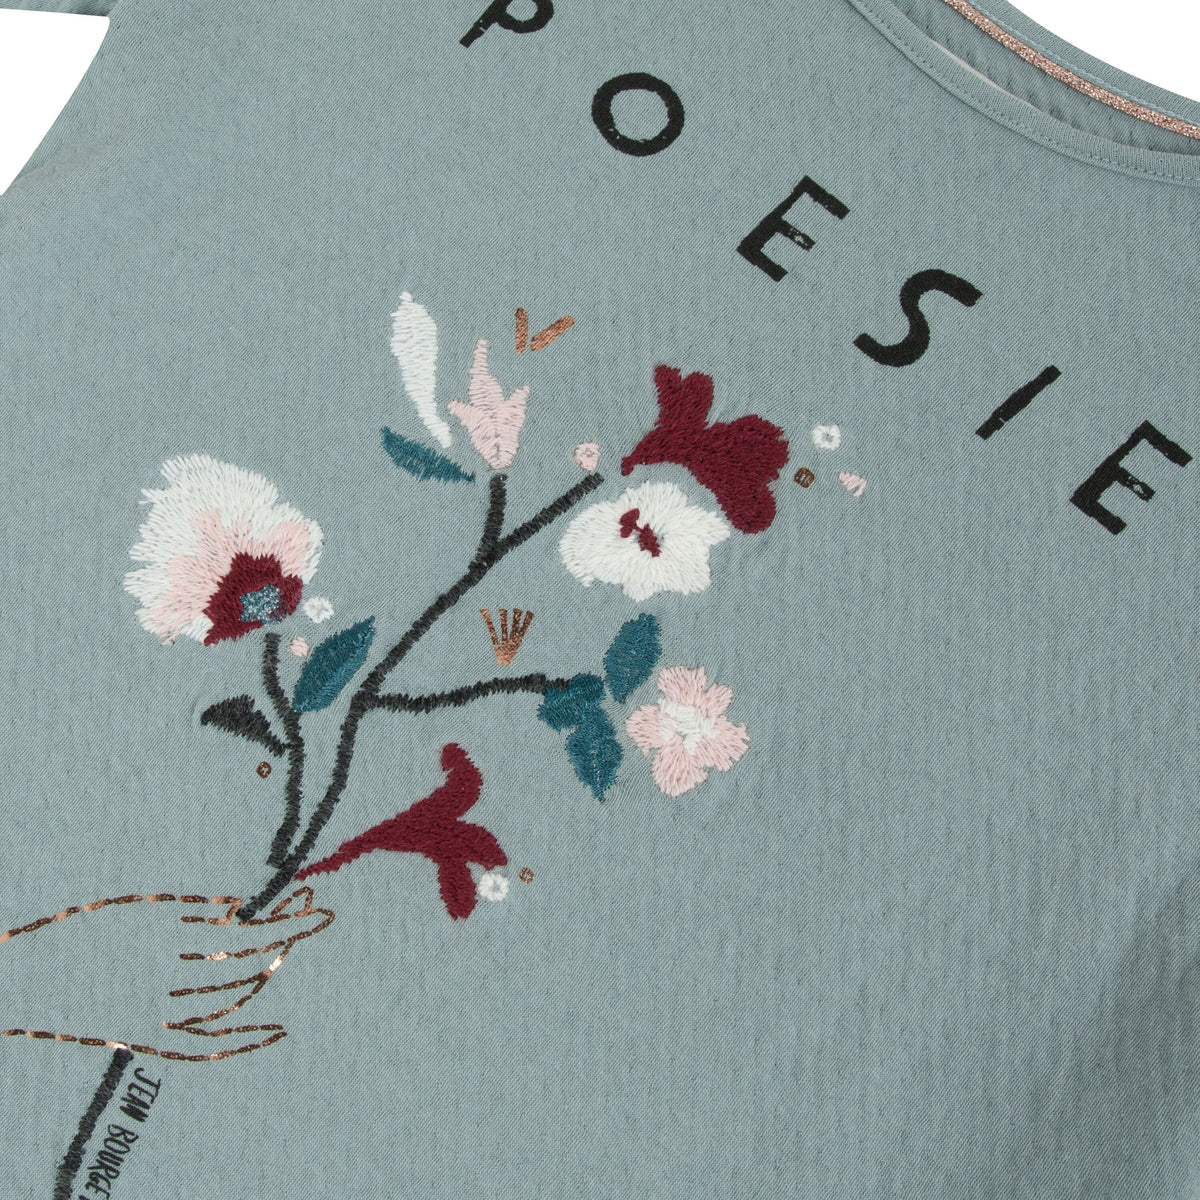 Blue grey jacquard knit with long sleeves and round neck features a floral bouquet embroidered with gold lurex at the collar and sleeves by Jean Bourget.